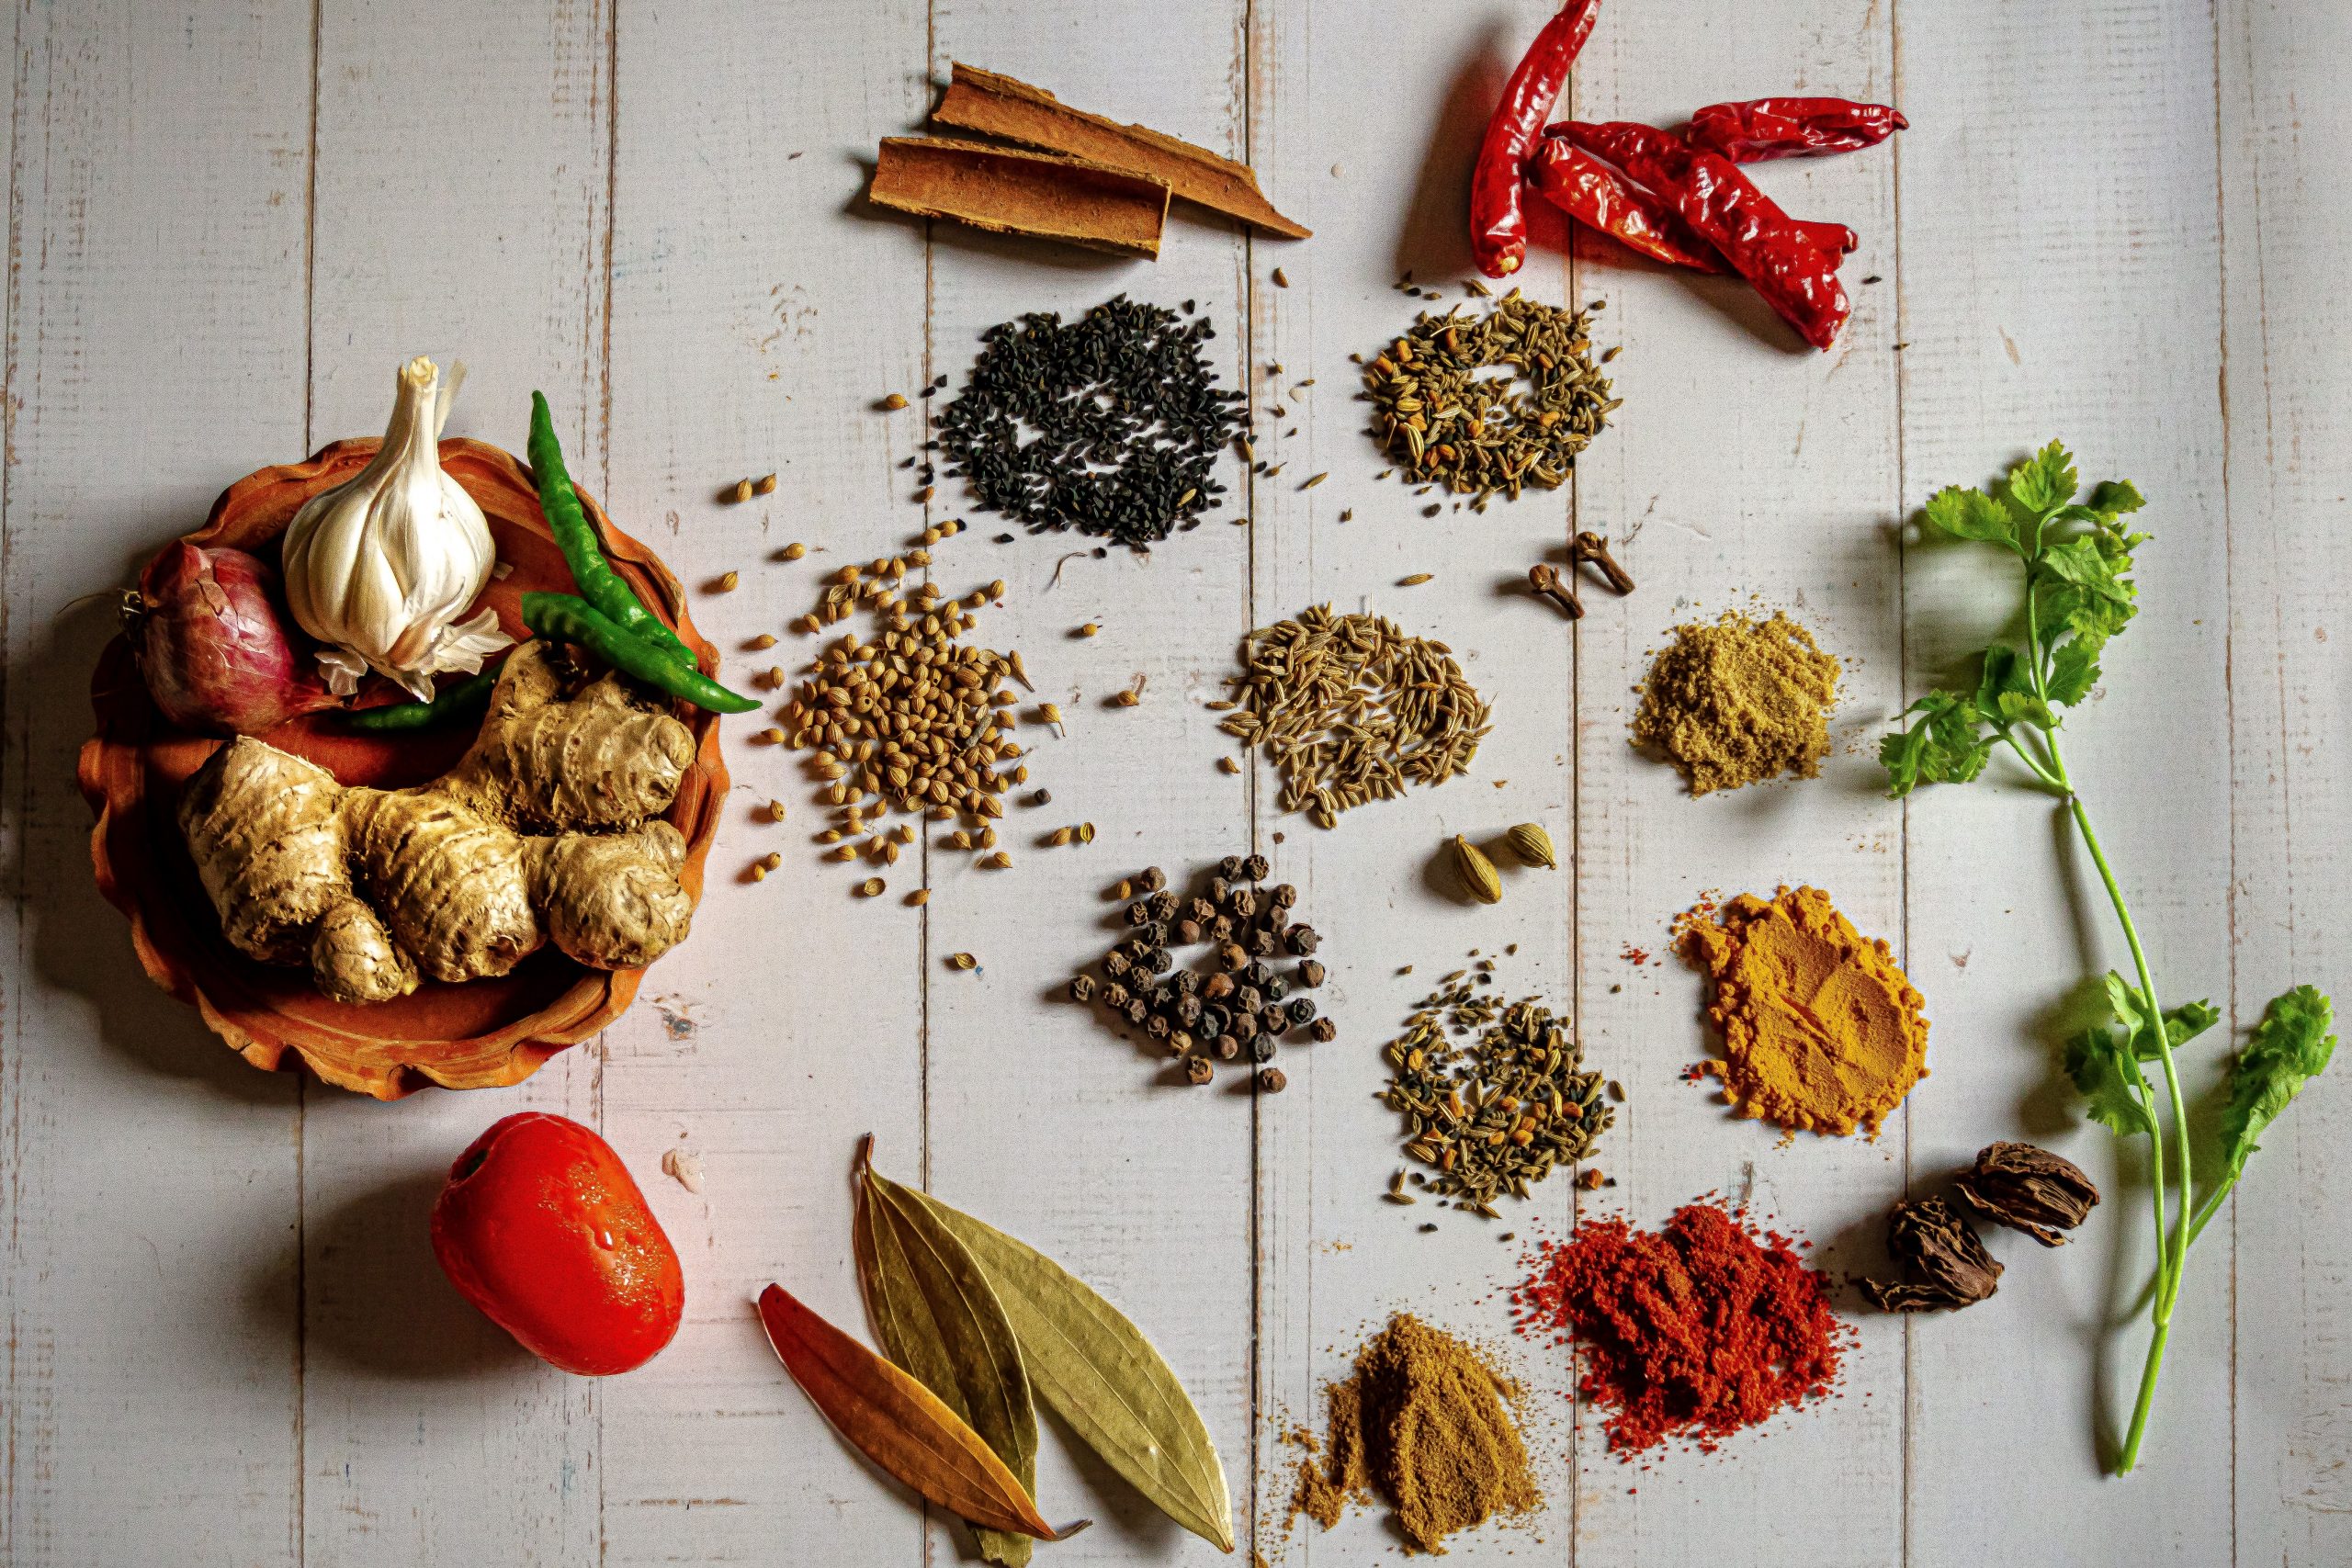 These spices can help you say goodbye to extra weight this winter